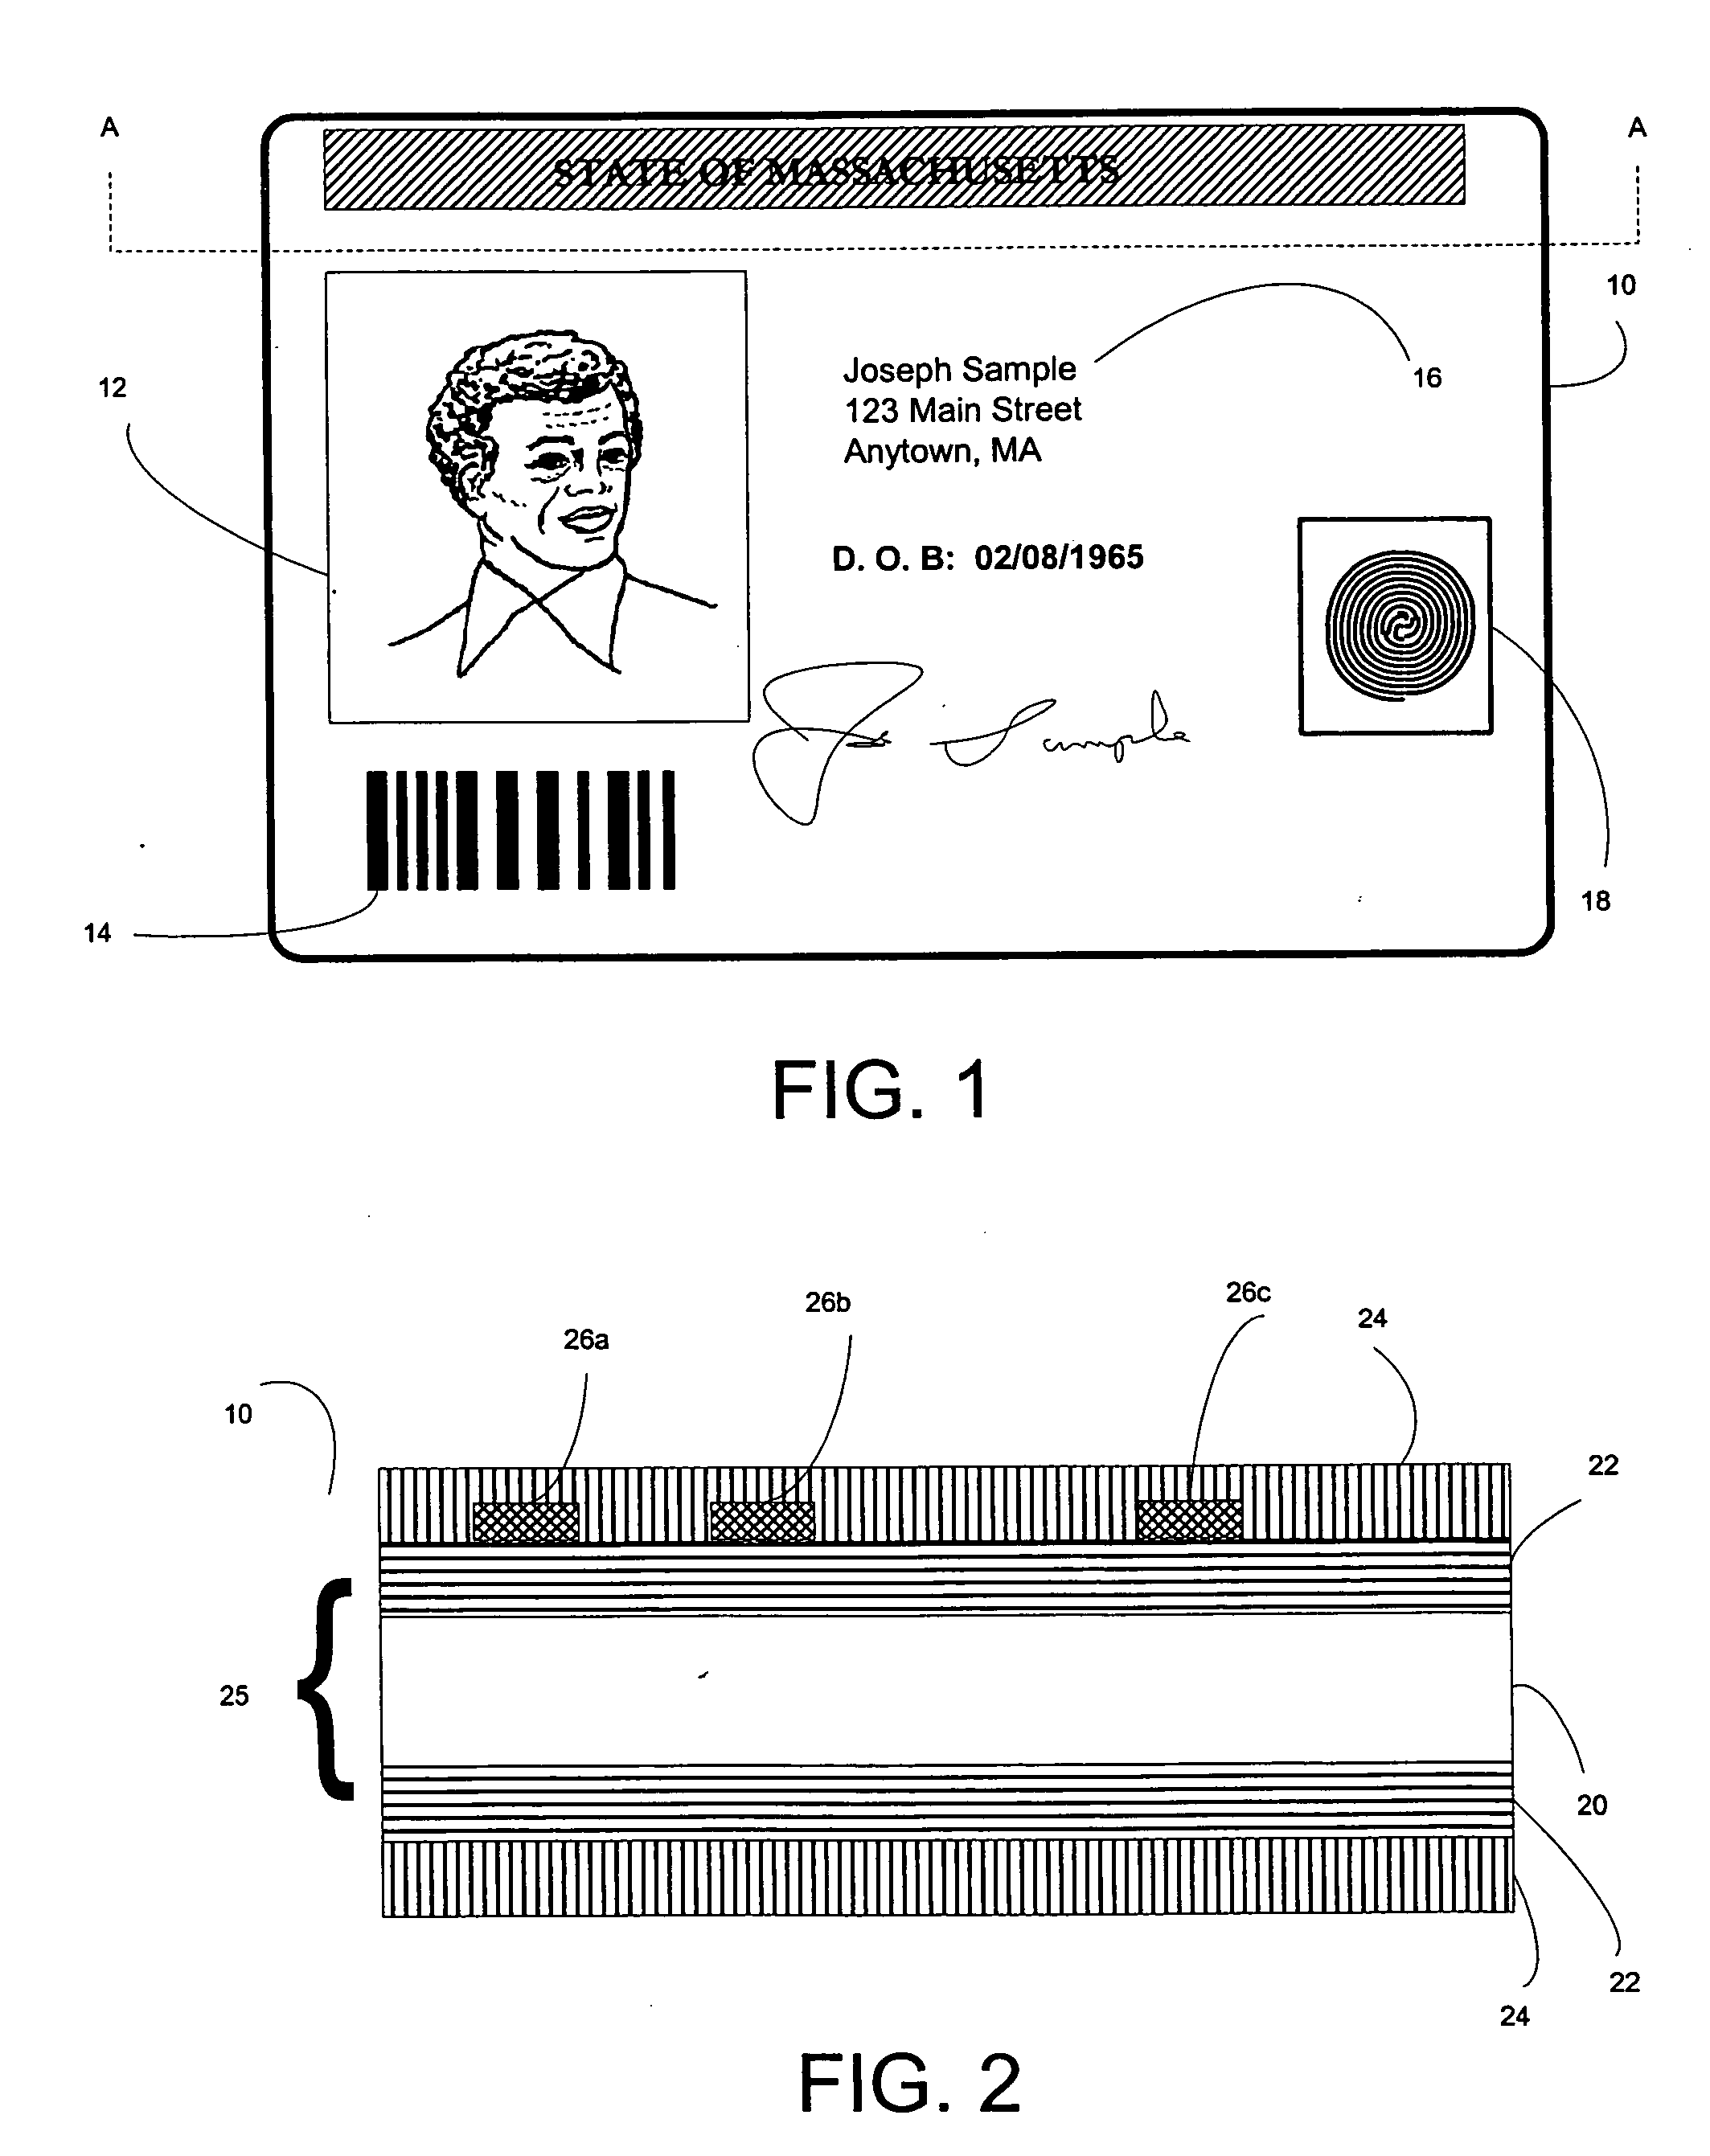 Inventory management system and methods for secure identification document issuance